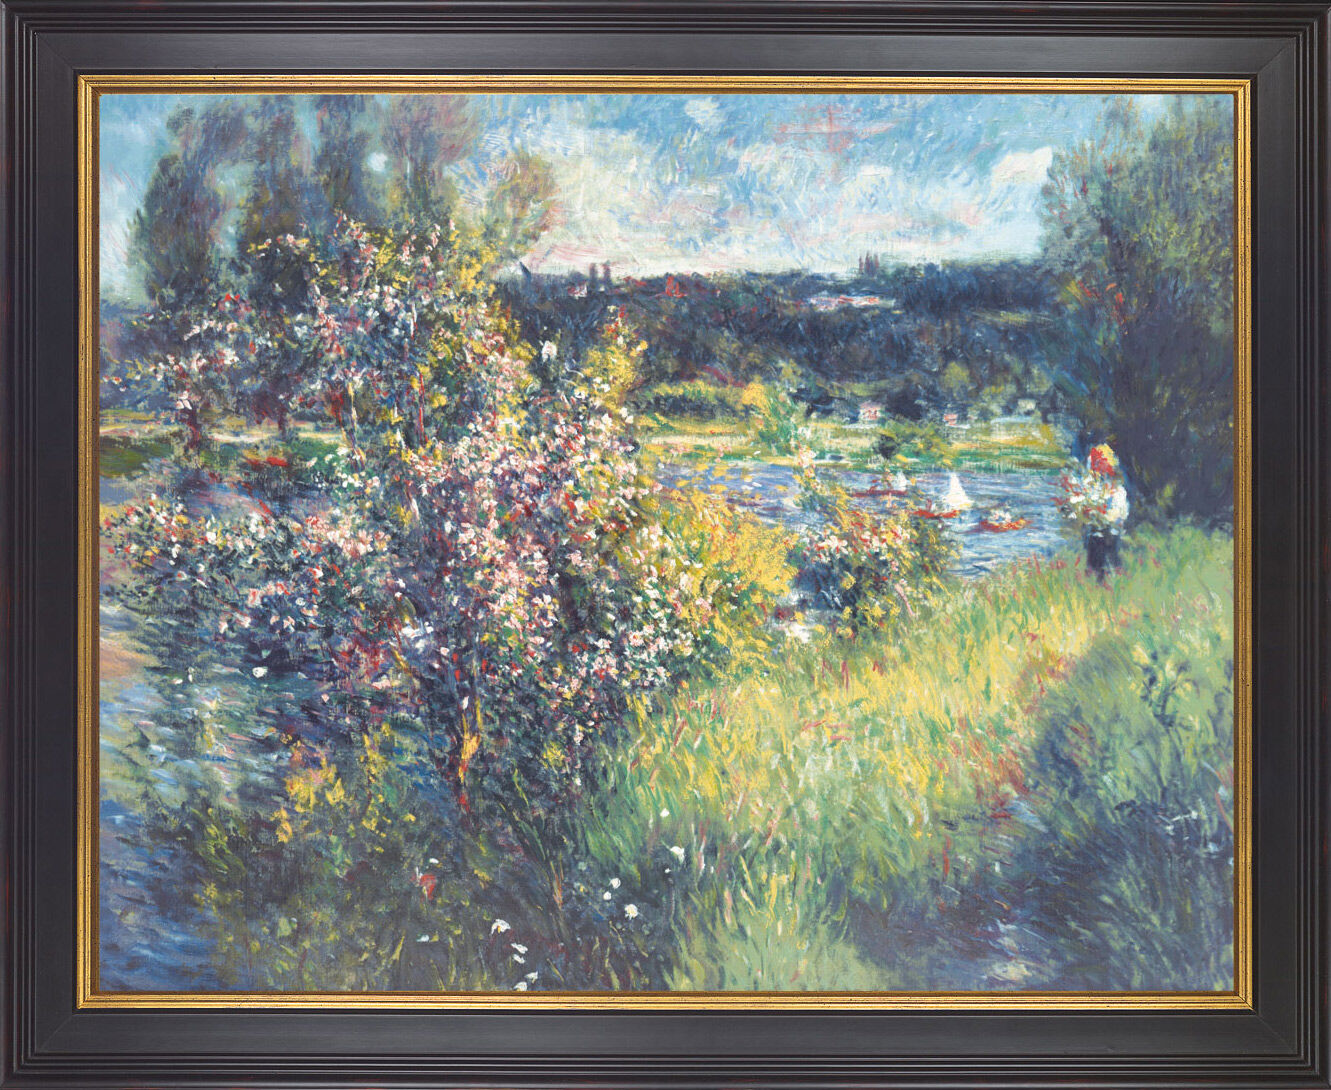 Picture "The Seine at Chatou" (1881), framed by Auguste Renoir